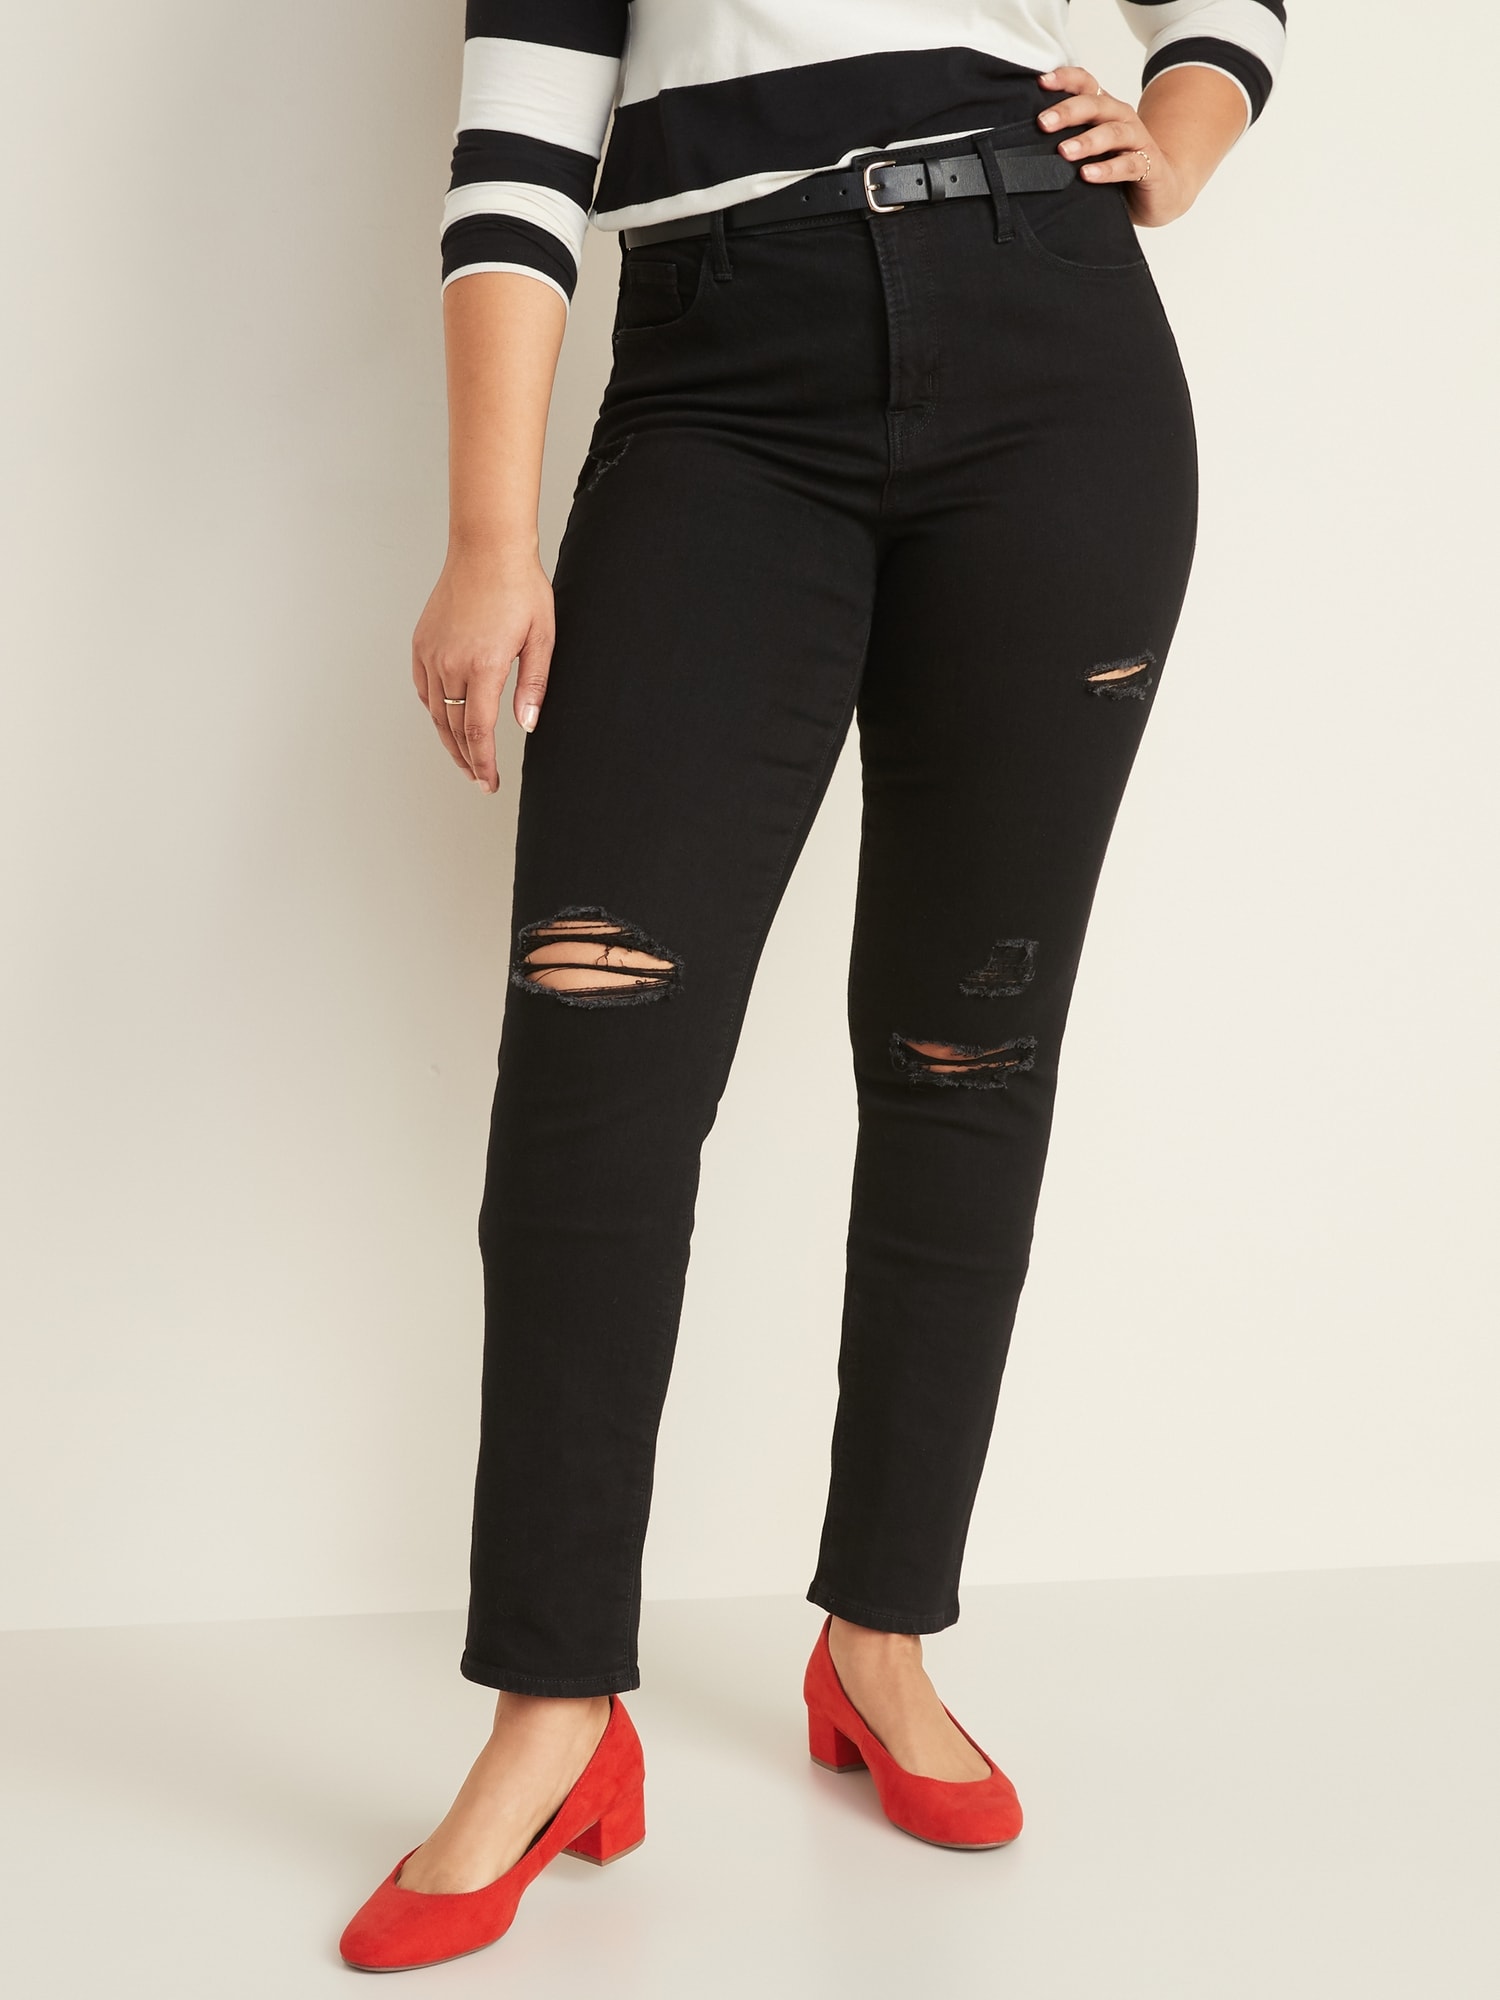 High-Waisted Distressed Power Slim Straight Black Jeans For Women